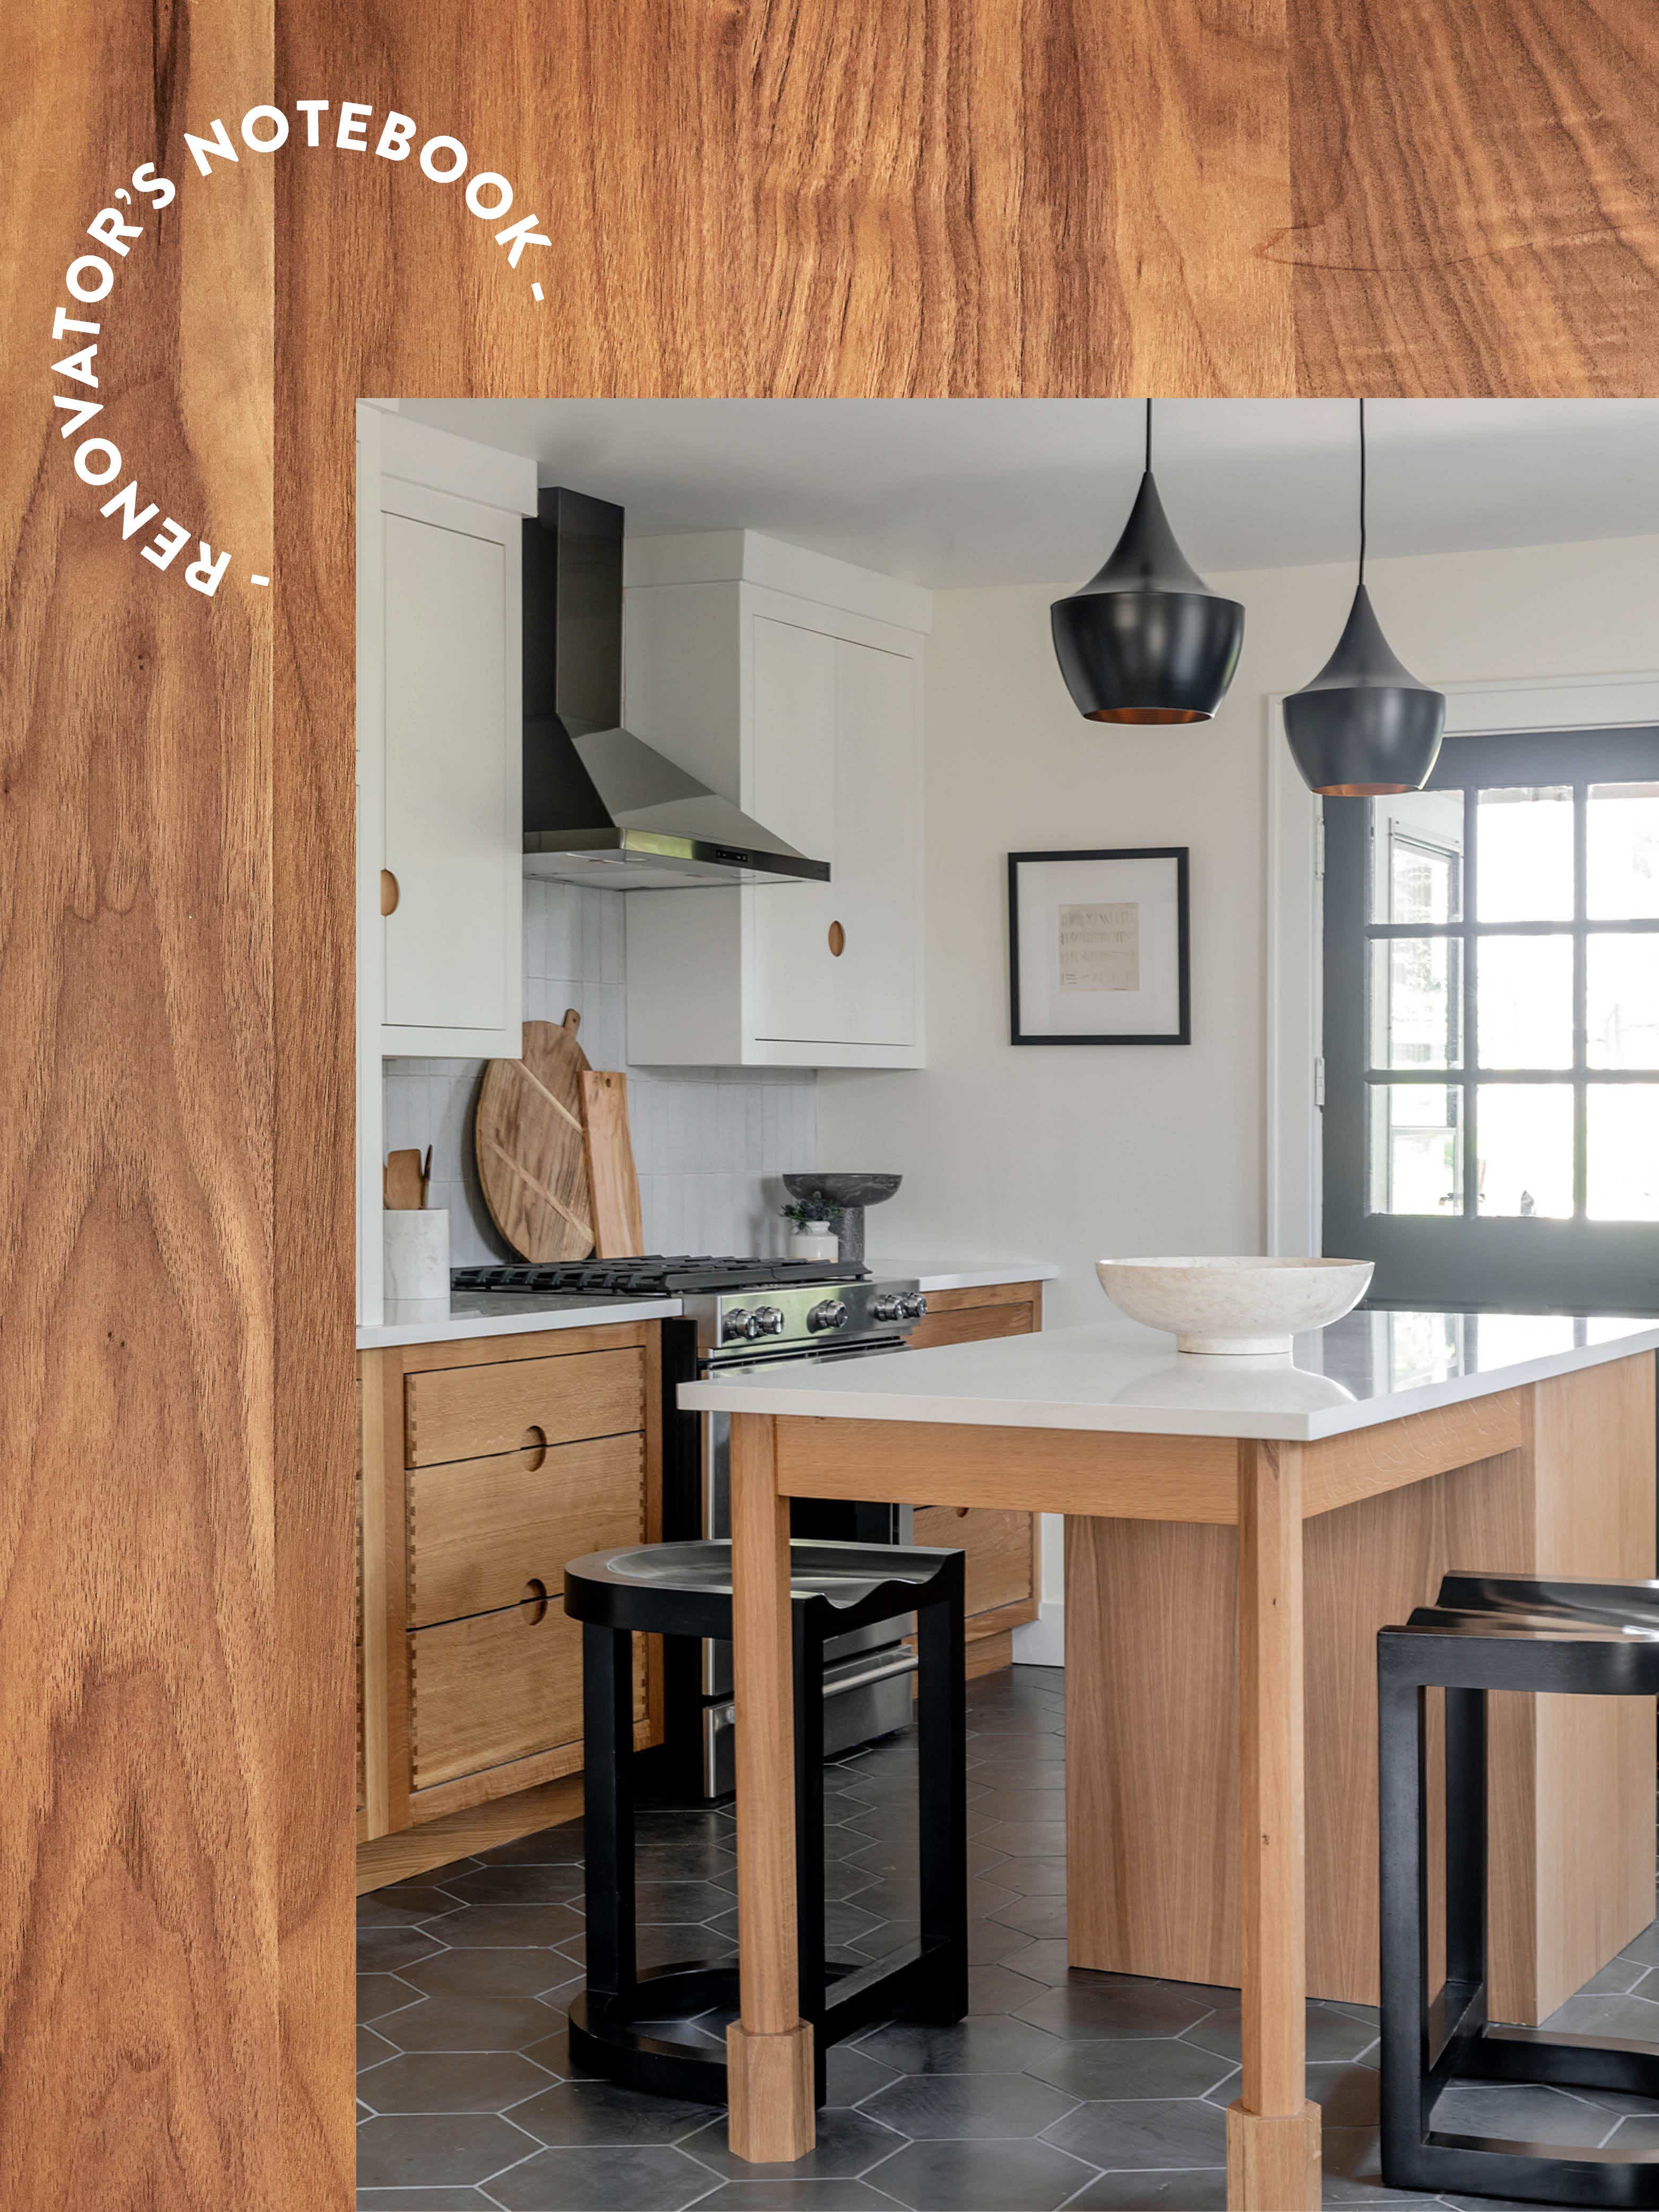 Why We Decided Against IKEA Cabinets for Our $48K Kitchen Remodel